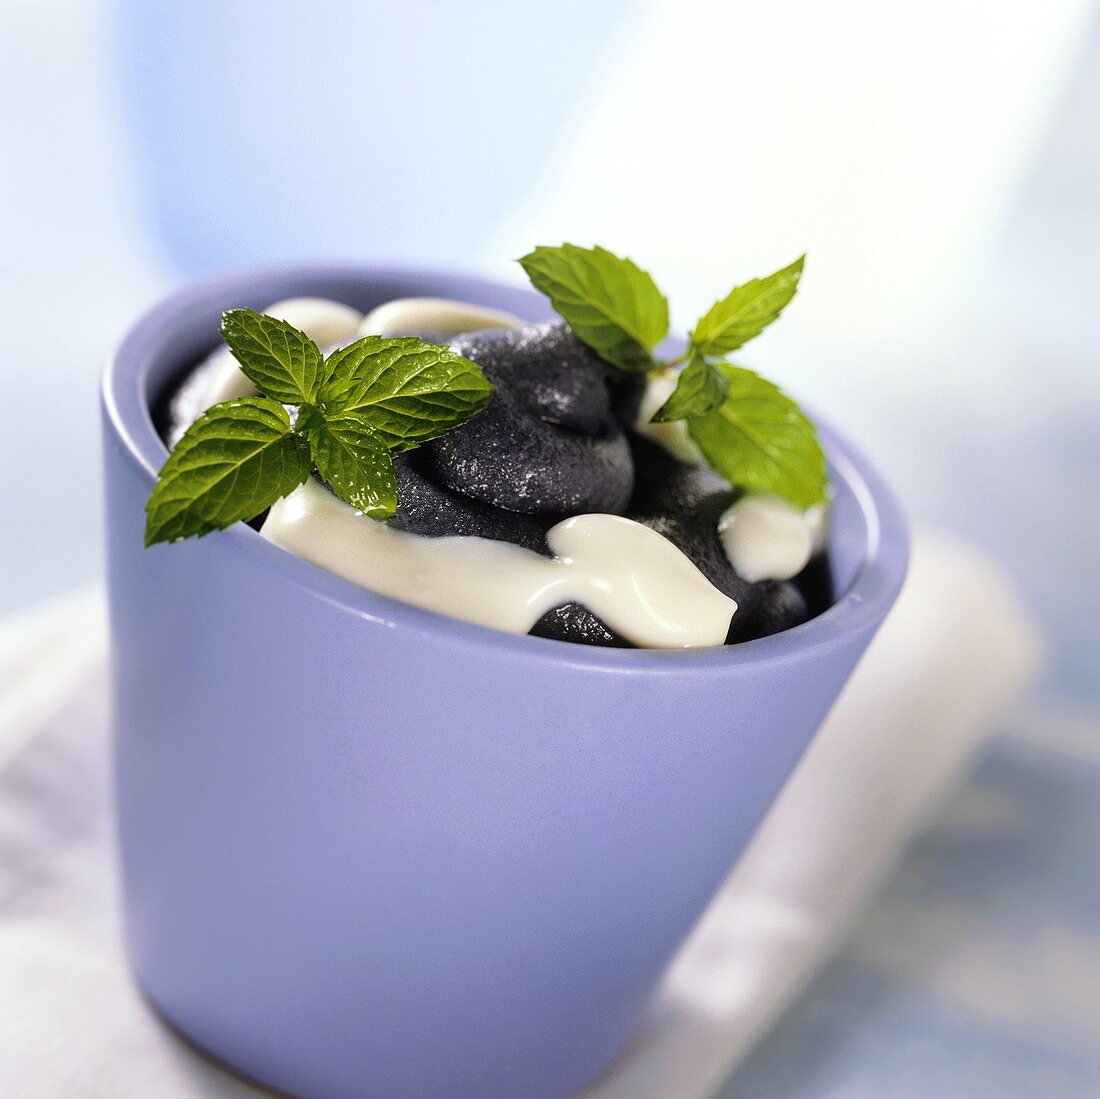 Blueberry sorbet with cream and mint